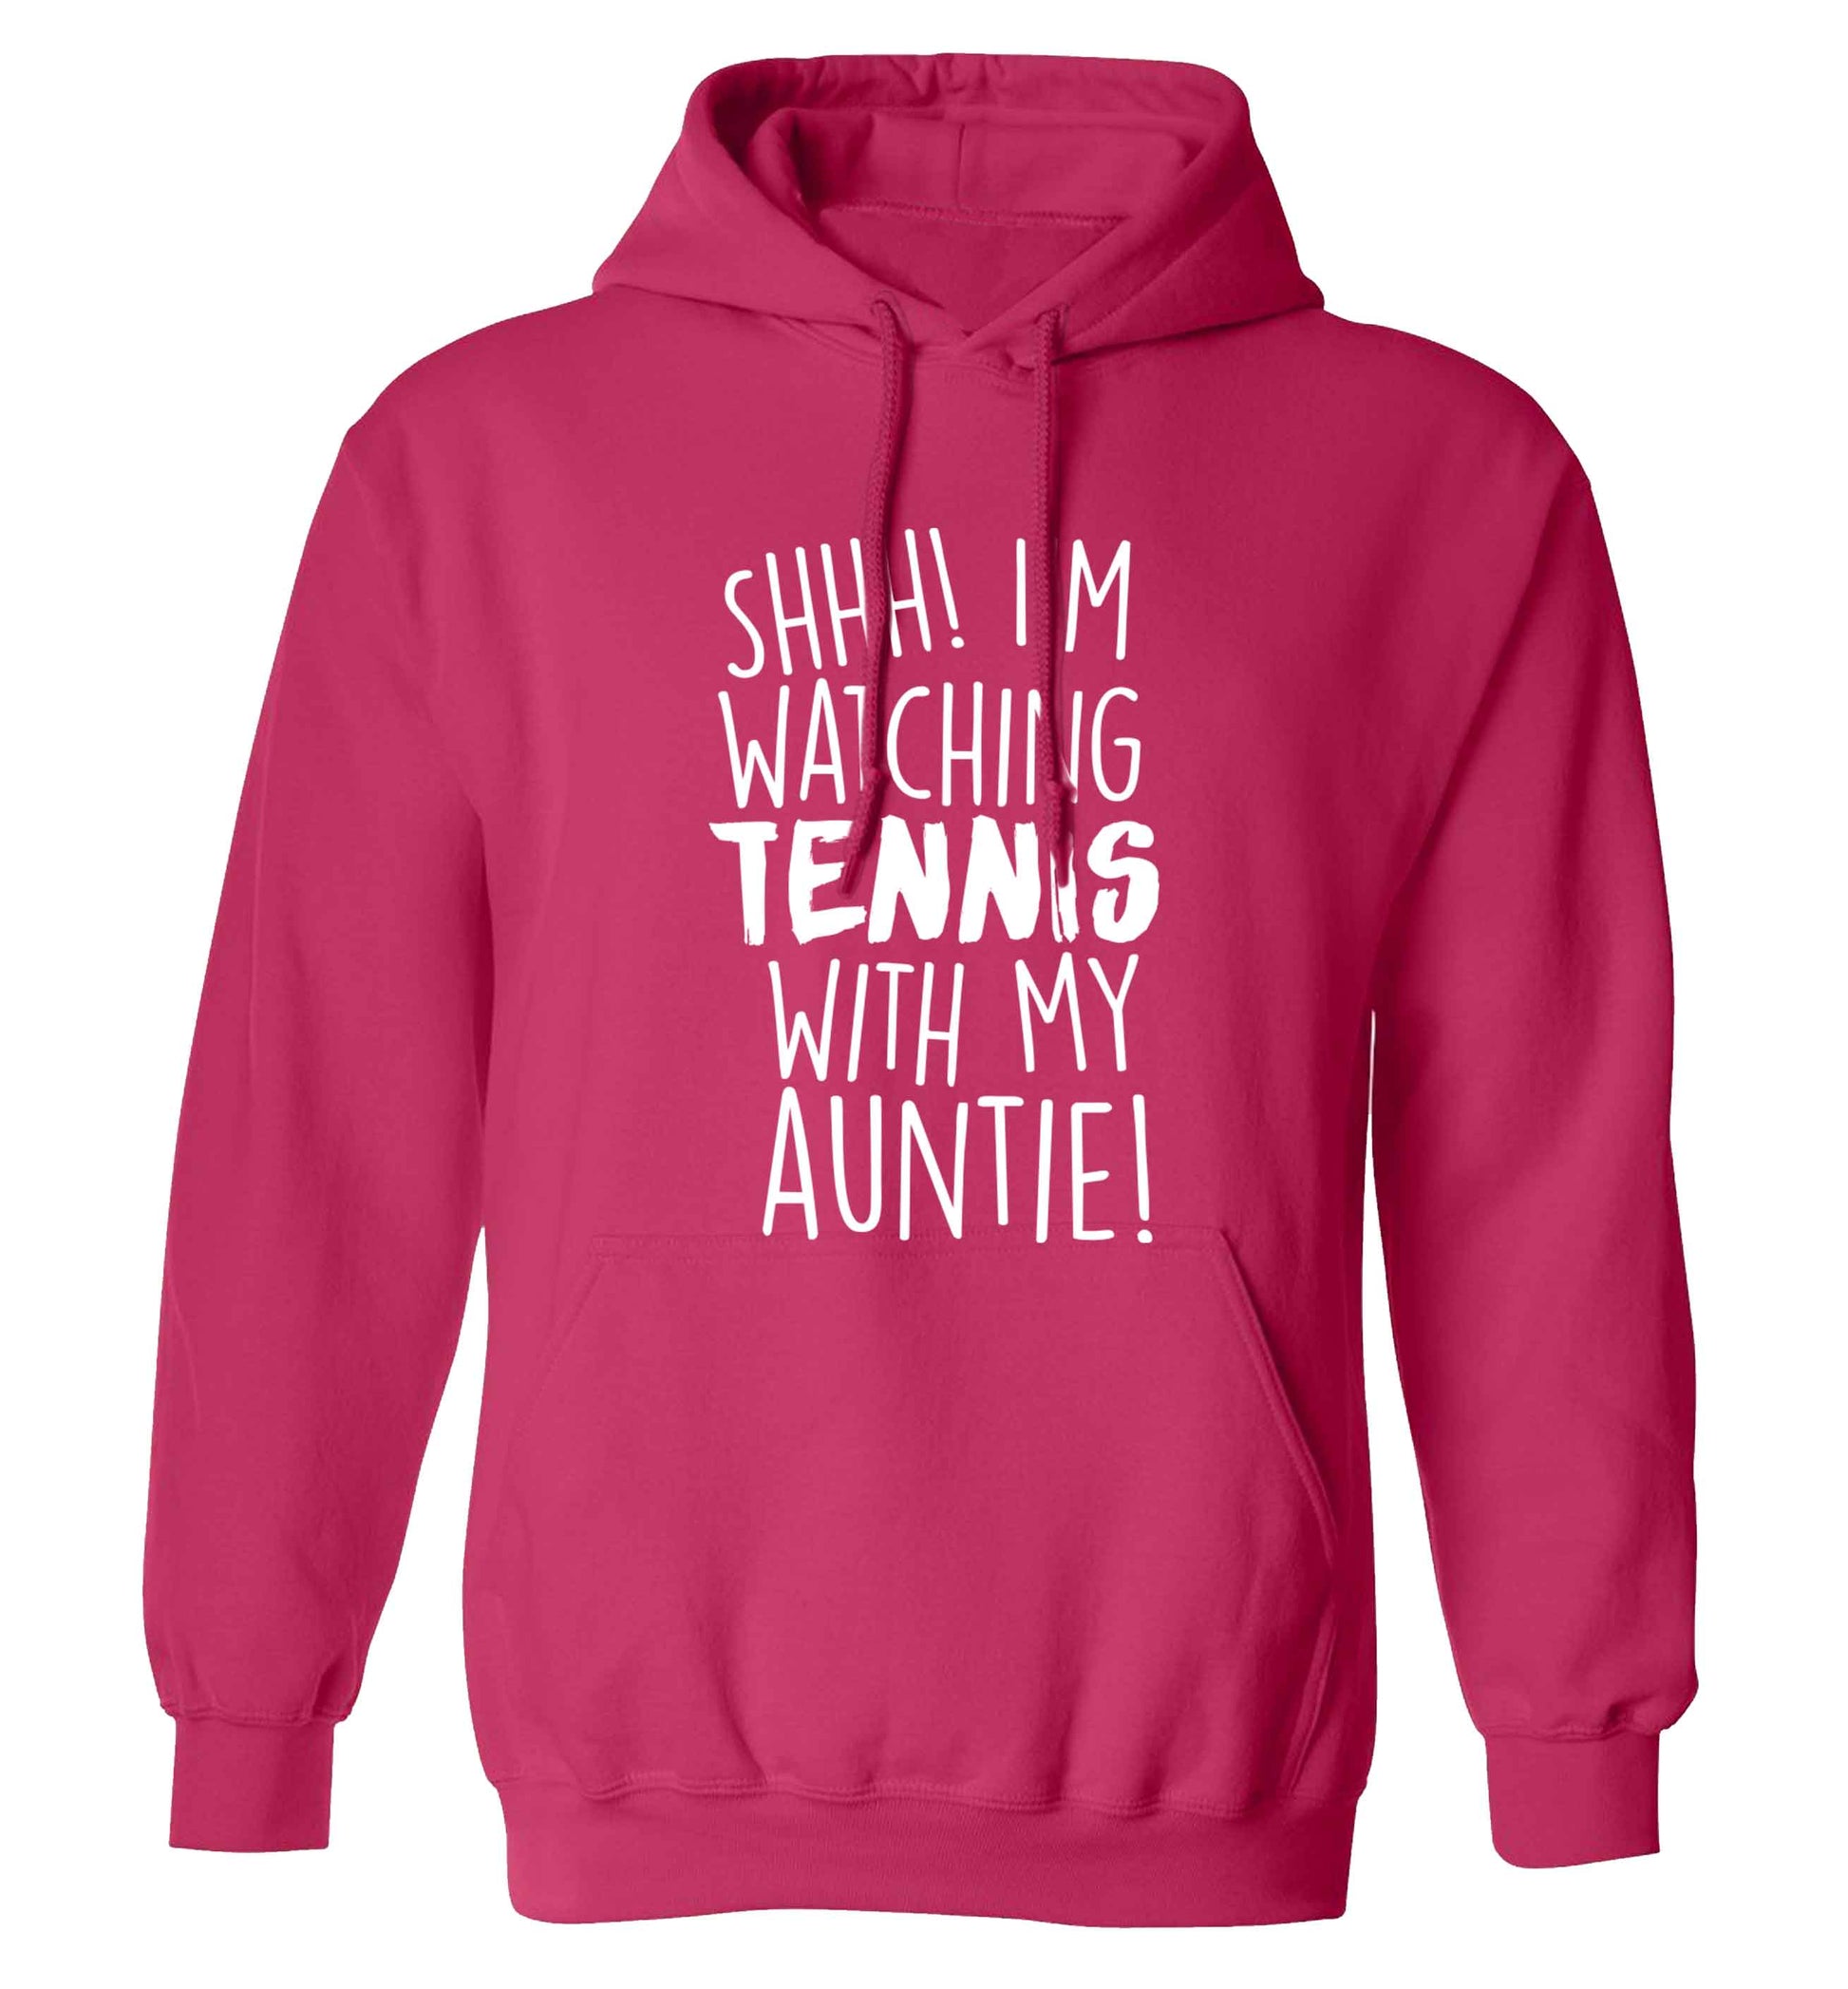 Shh! I'm watching tennis with my auntie! adults unisex pink hoodie 2XL